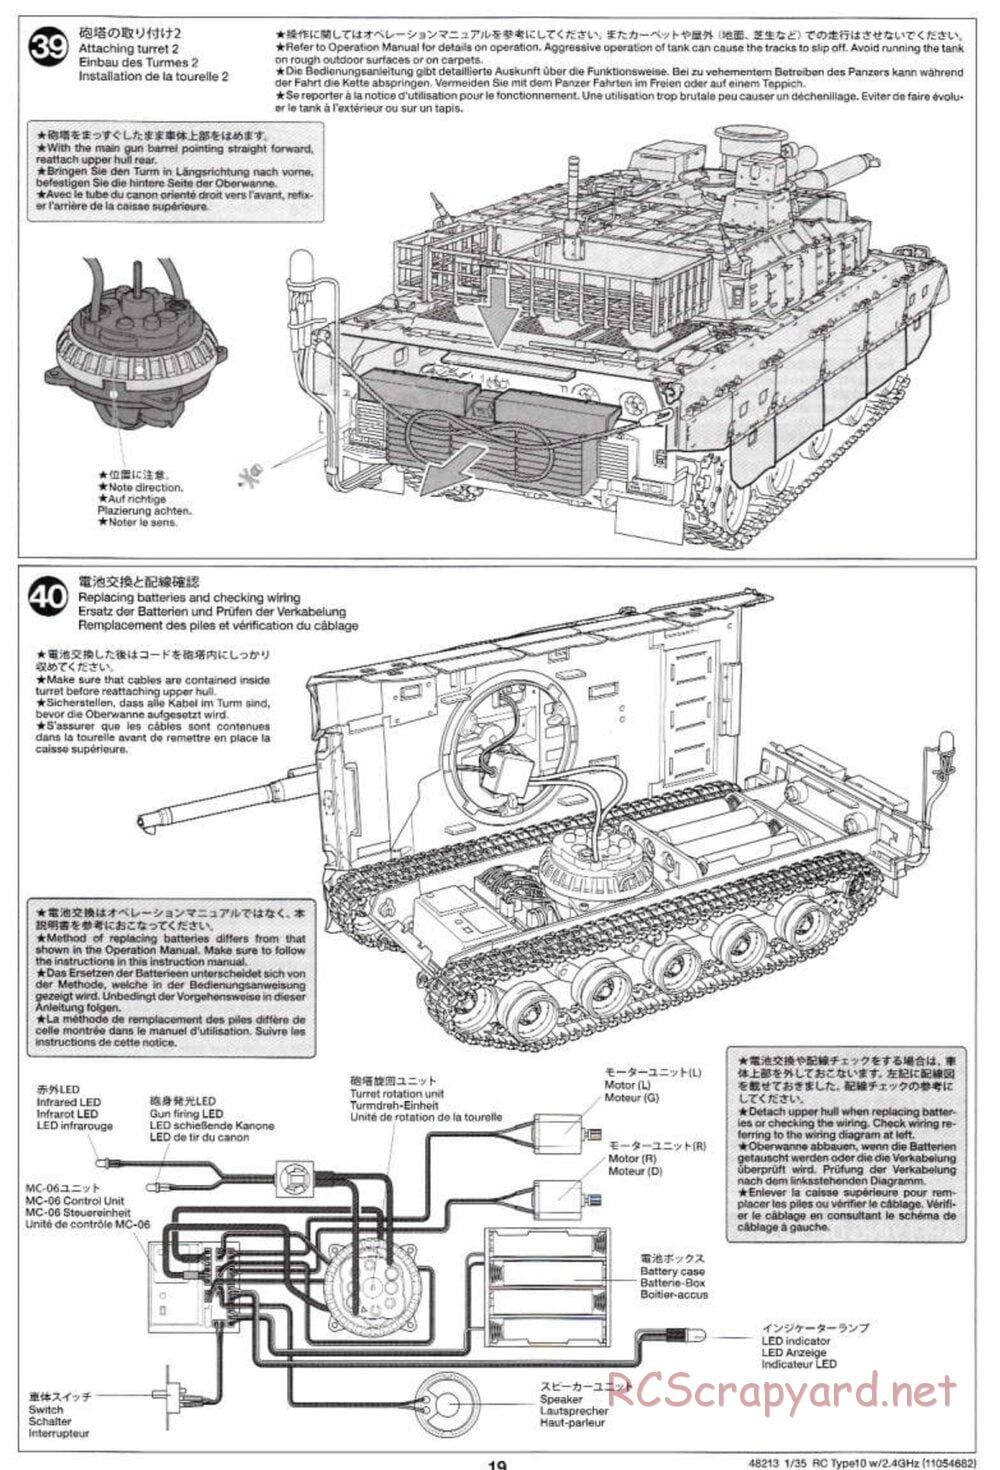 Tamiya - JGSDF Type 10 Tank - 1/35 Scale Chassis - Manual - Page 19